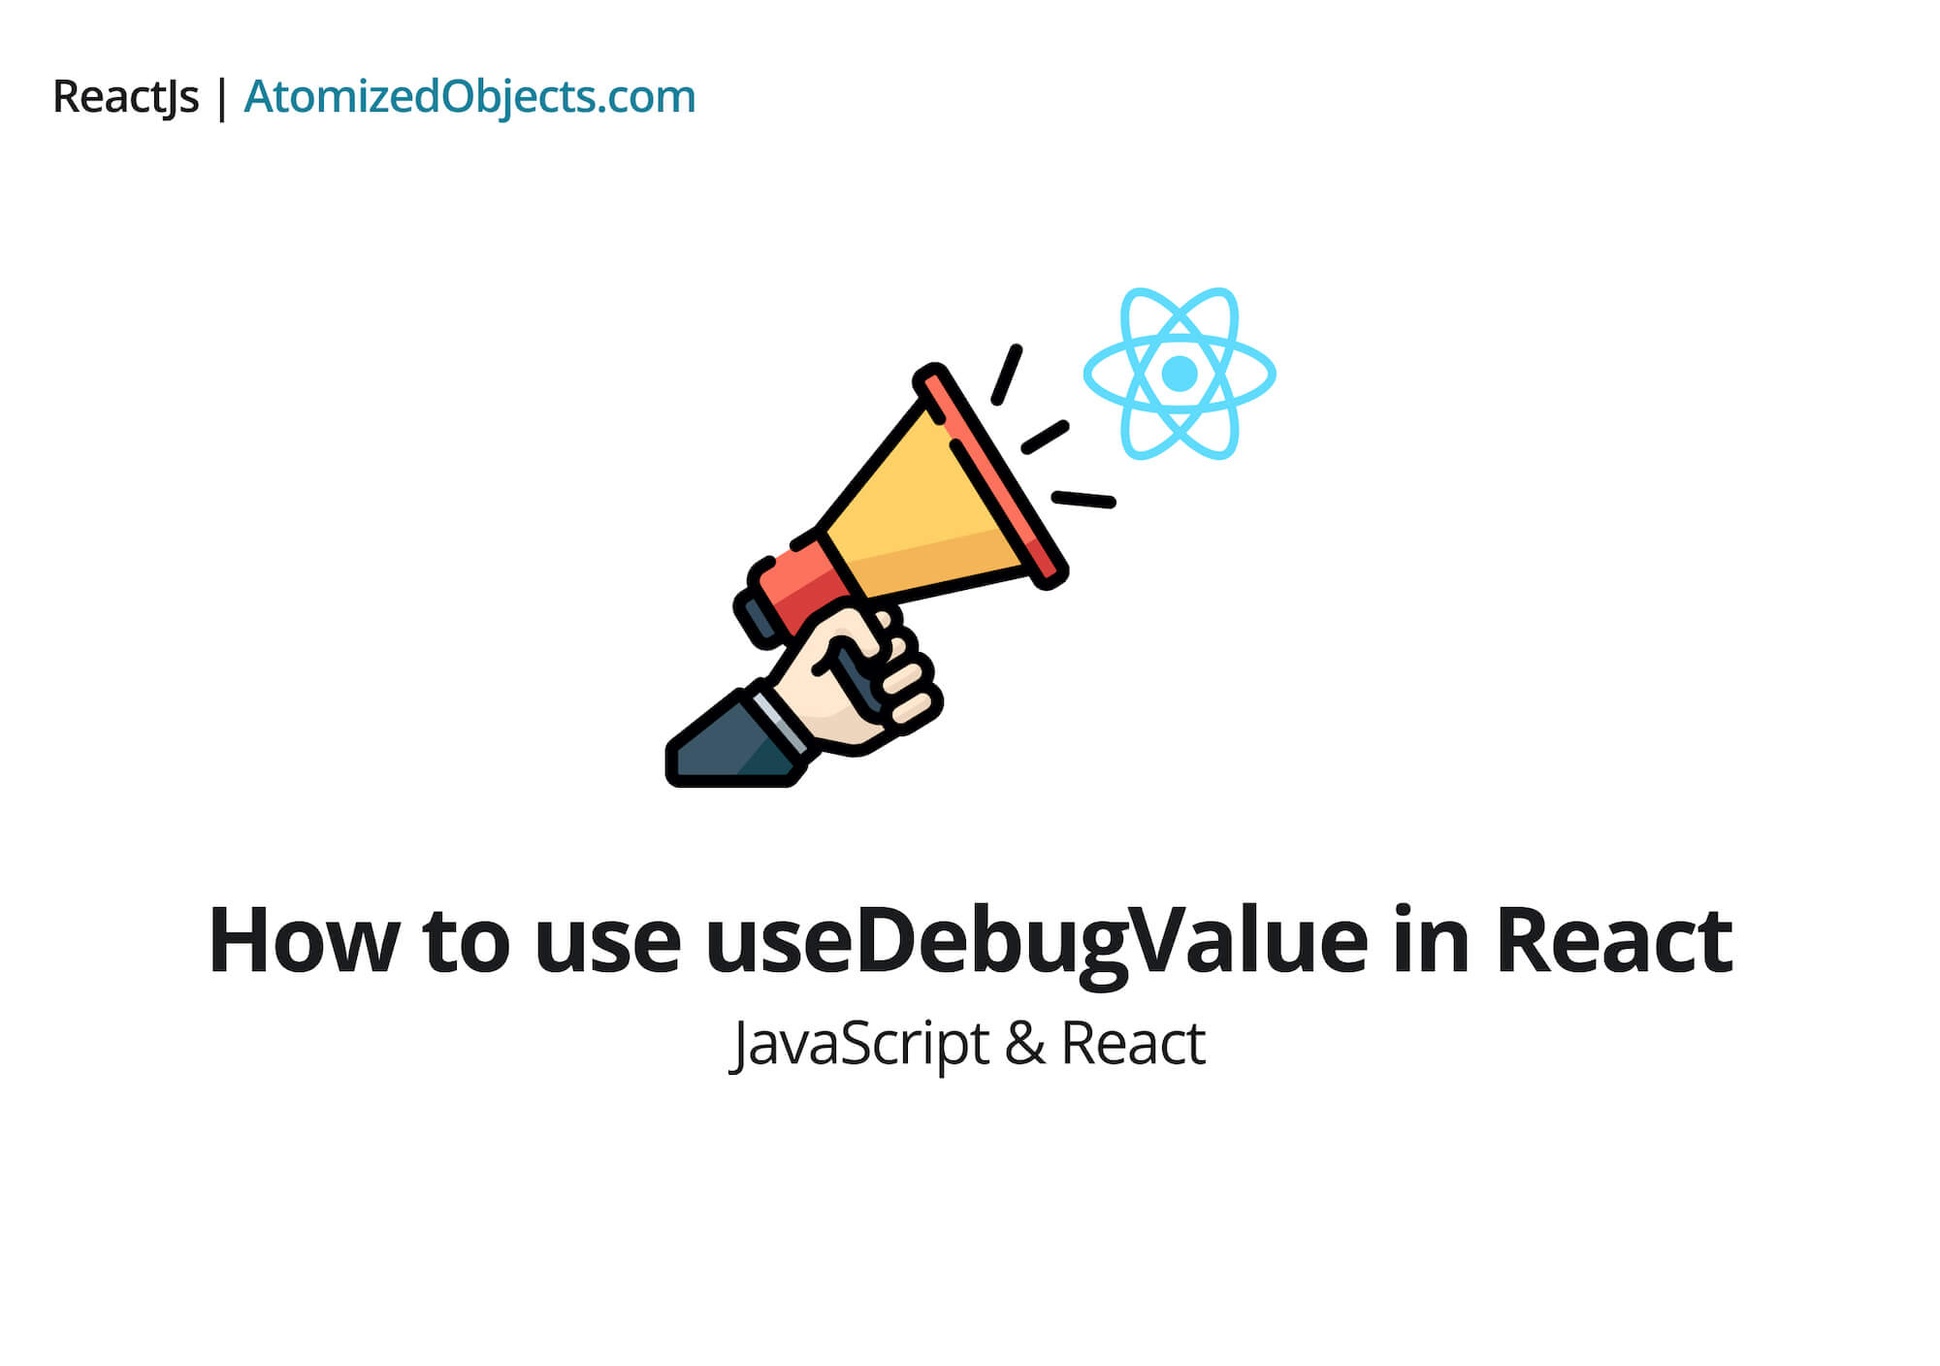 How to use useDebugValue in React